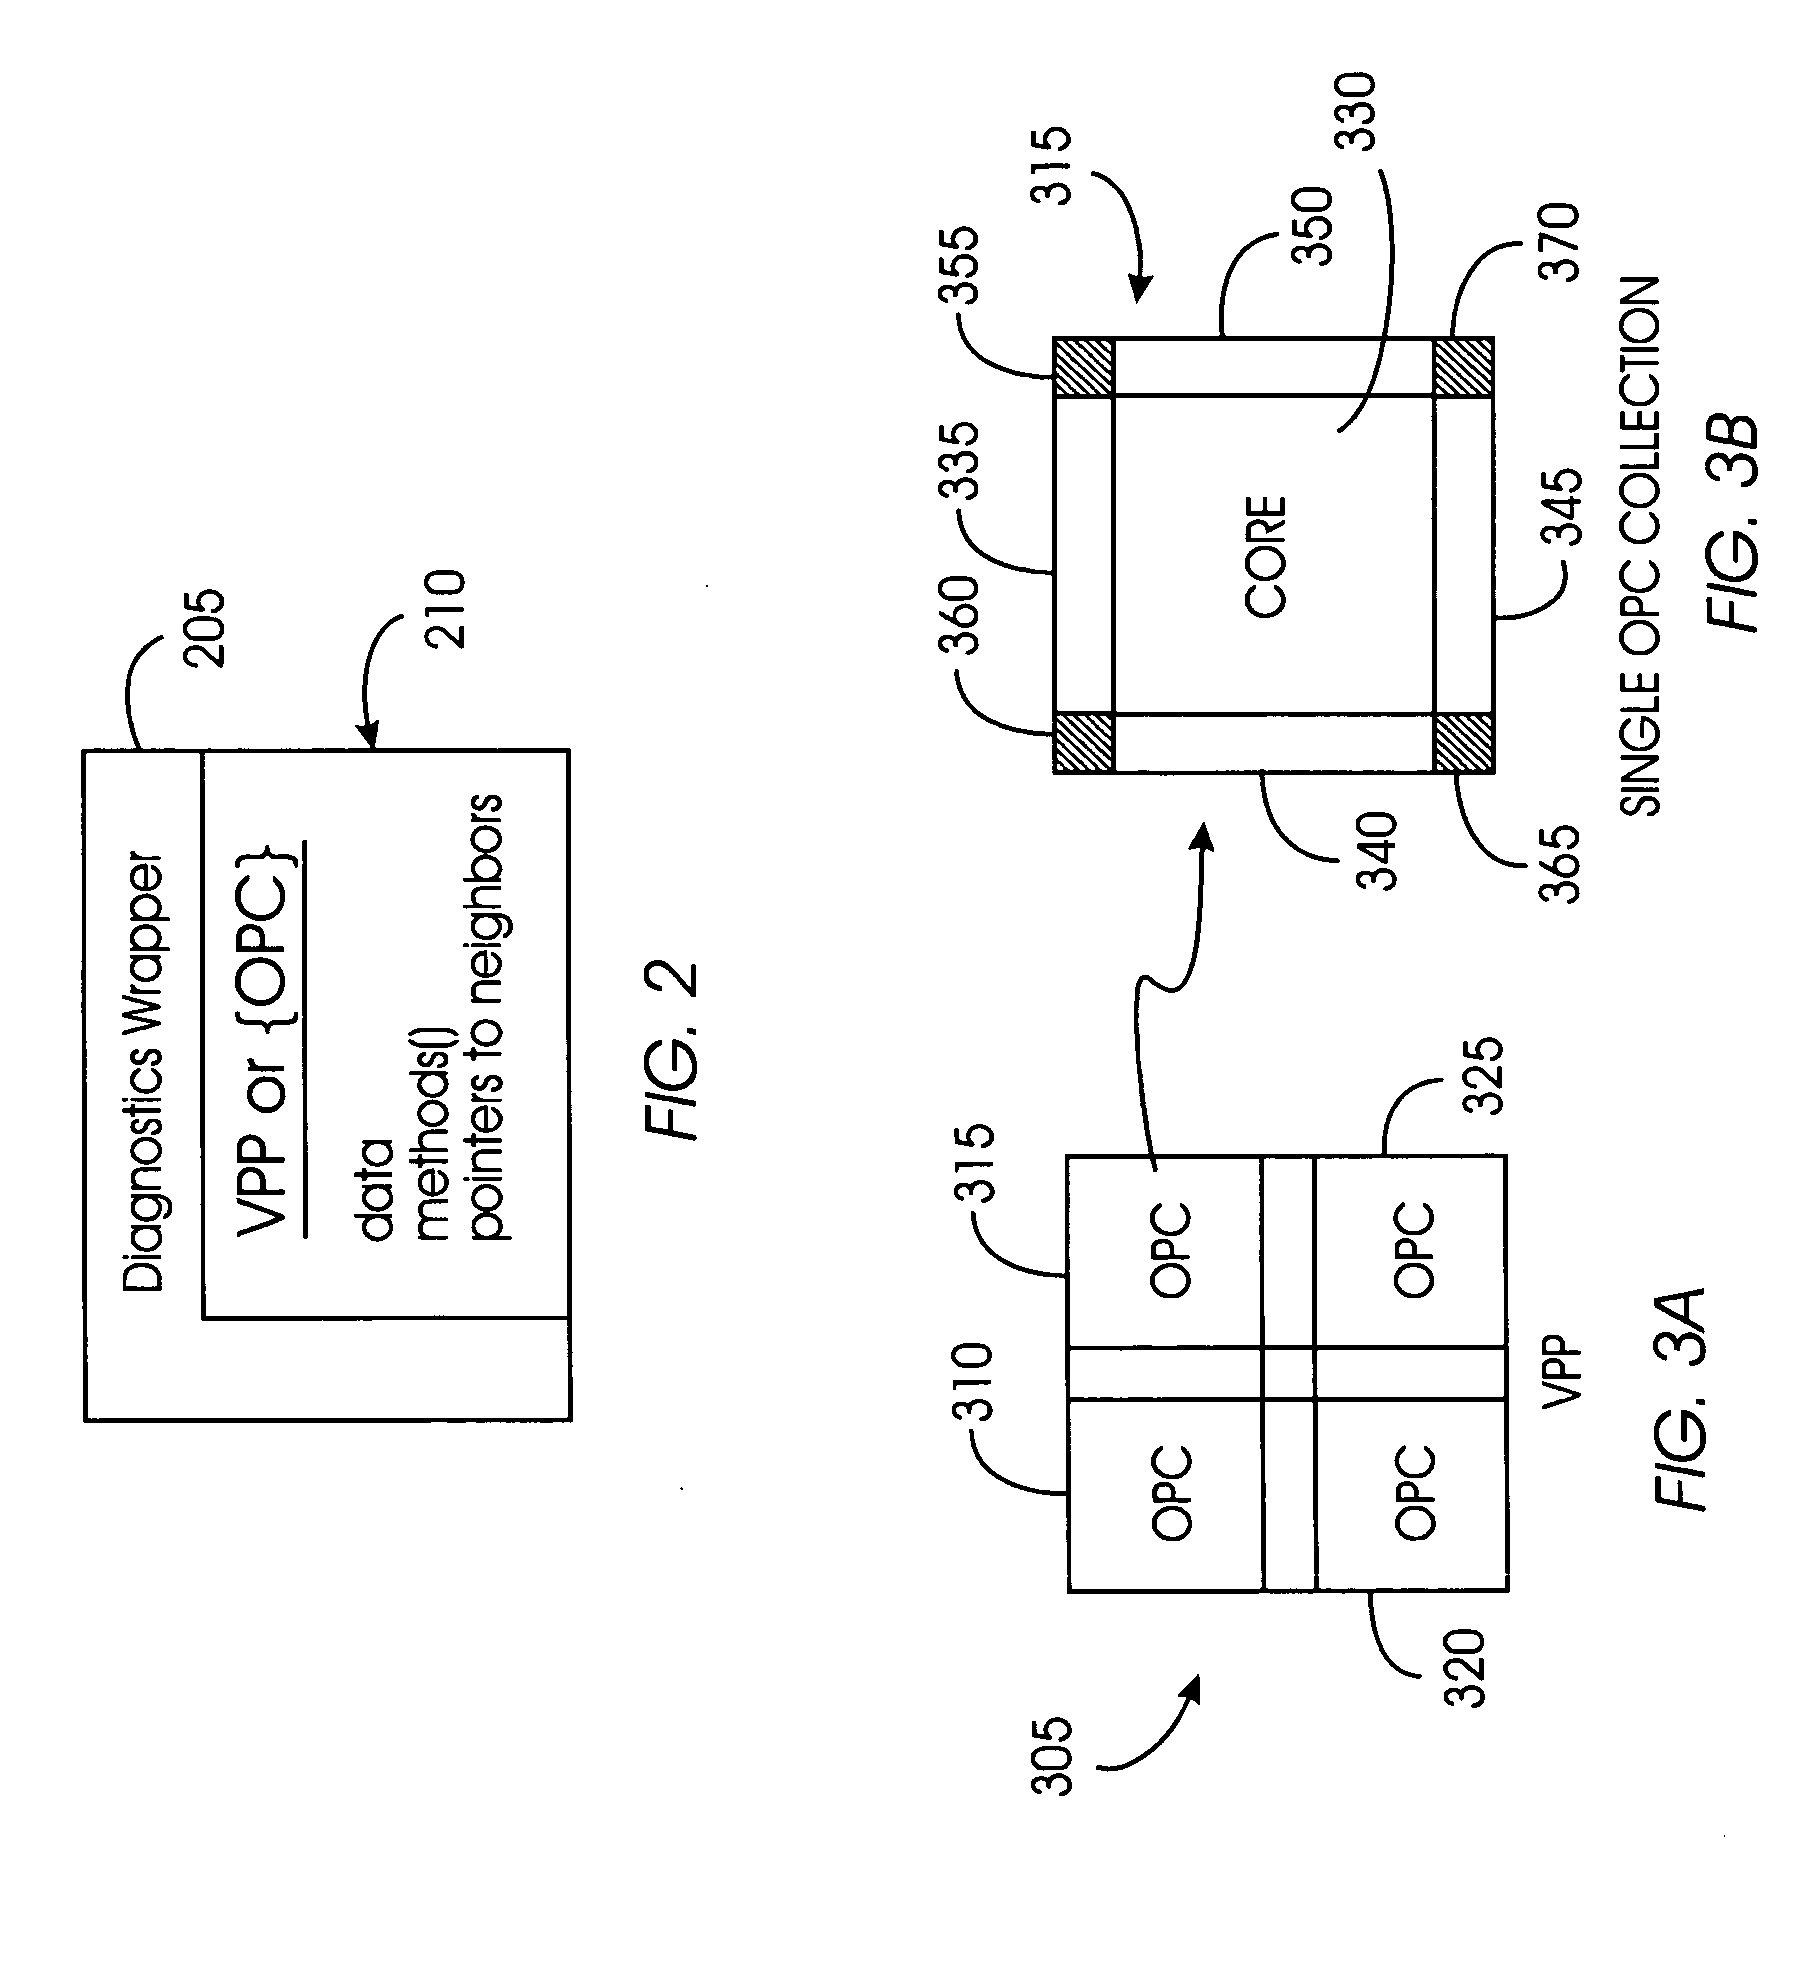 System and method for automatically segmenting and populating a distributed computing problem